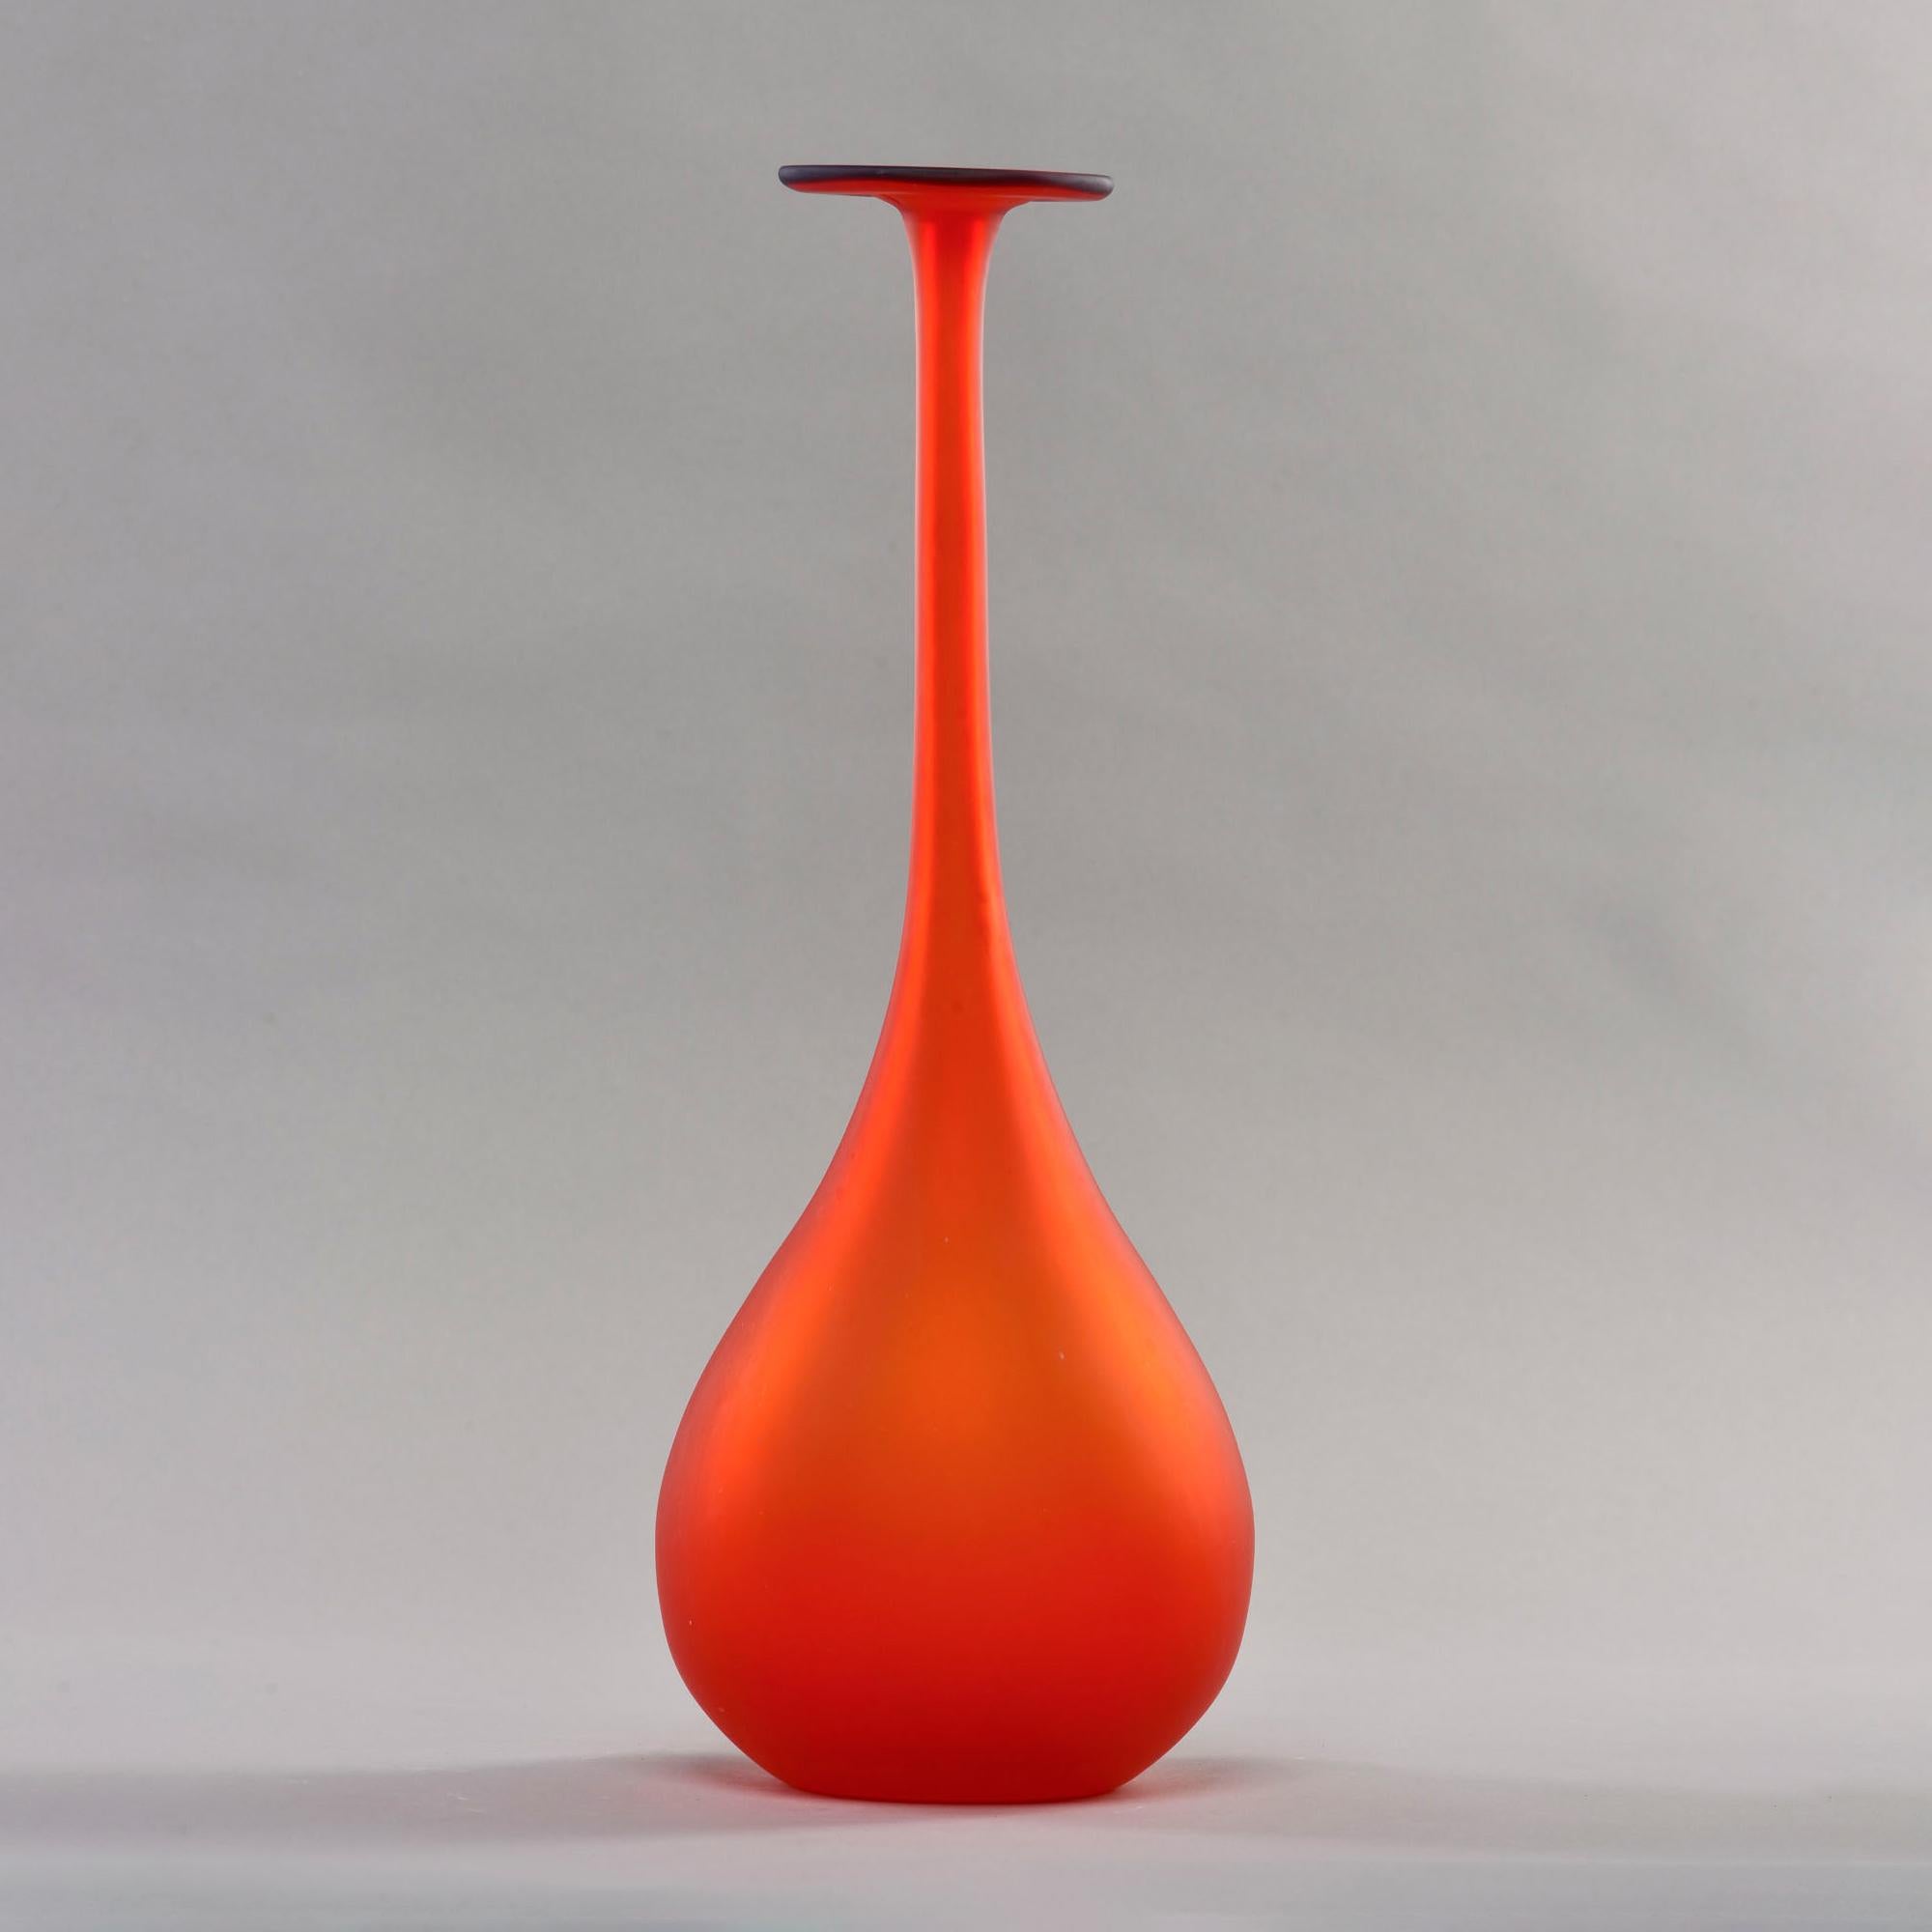 Circa 1960s Murano vase in red satin glass features a tall, slender neck accented with a wide, flat lip in deep cobalt blue. No signature found. Unknown maker.

Very good vintage condition with minor scattered surface wear. No flaws found.
 